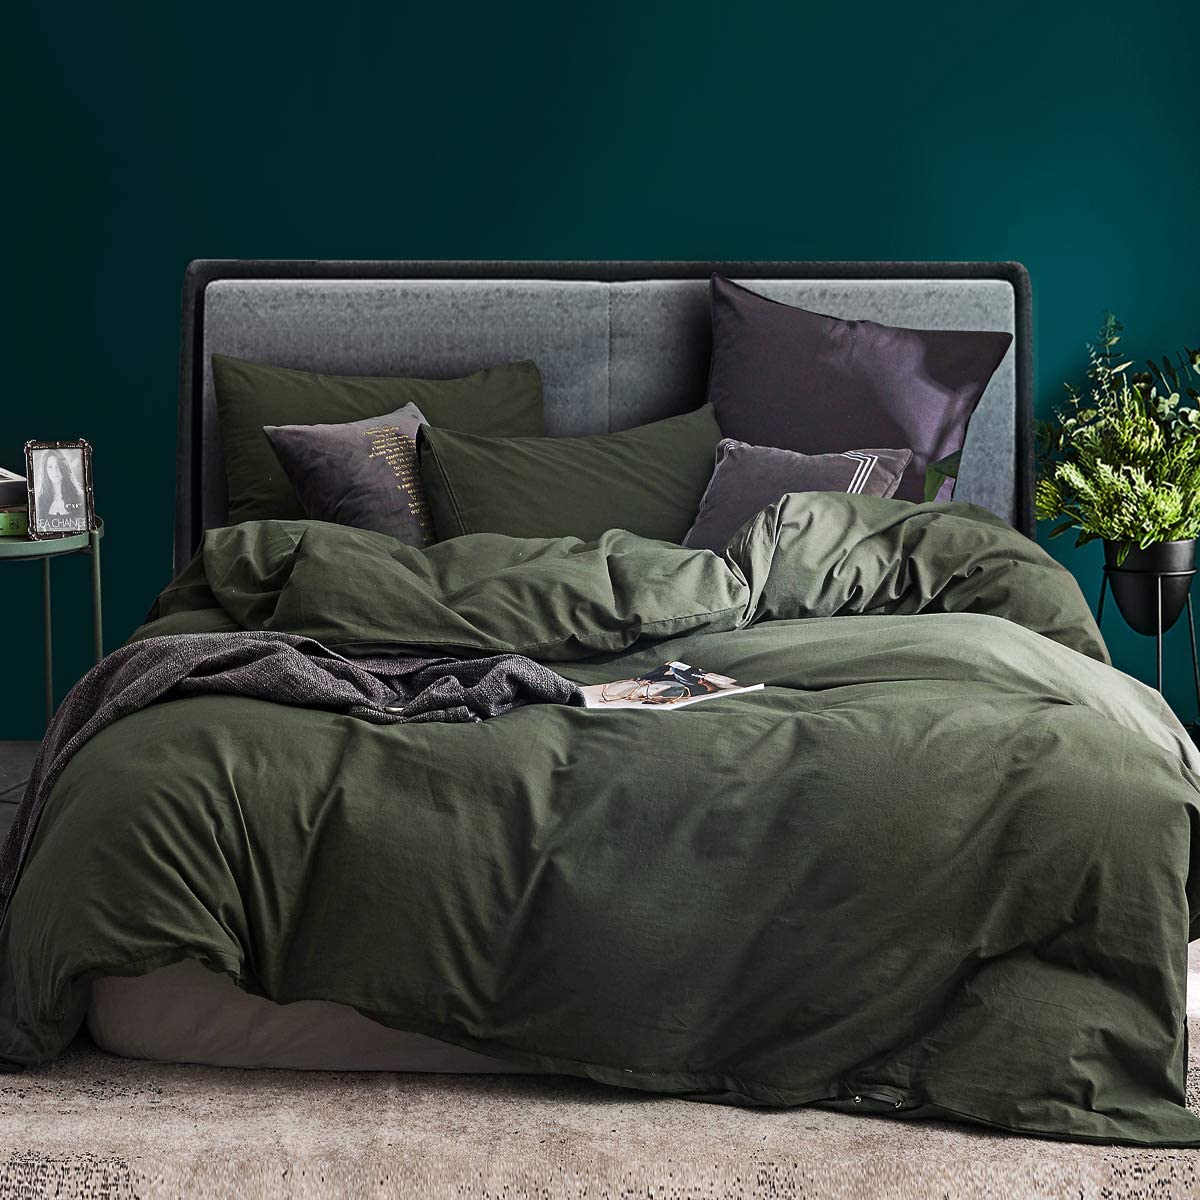 Price:$68.99 ECOCOTT 3 Pieces Duvet Cover Set Queen 100% Washed Cotton 1 Duvet Cover with Zipper and 2 Pillowcases, Ultra Soft and Easy Care Breathable Cozy Simple Style Bedding Set (Avocado Green) : Home & Kitchen